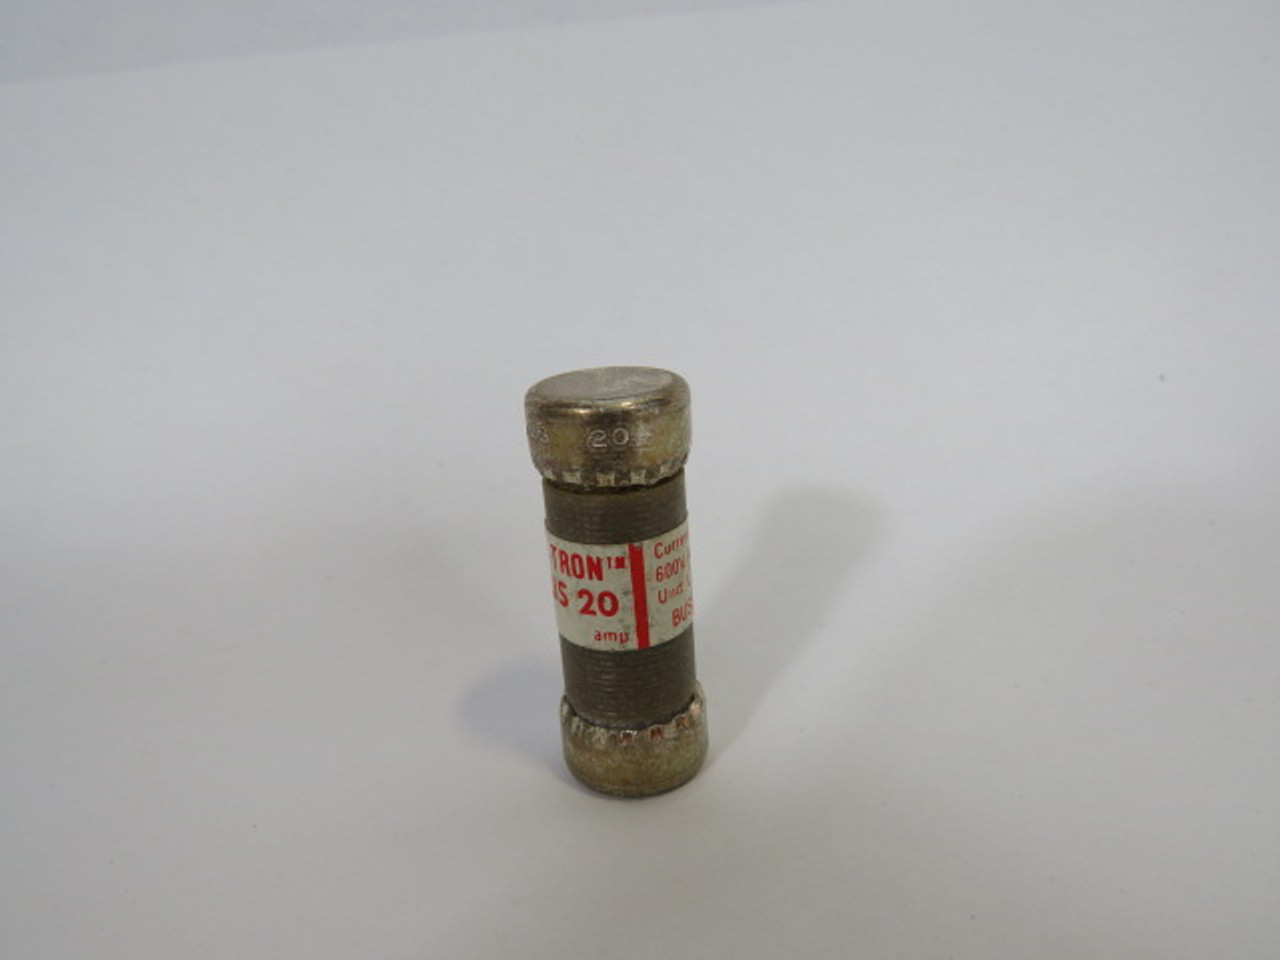 T-Tron JJS-20 Fast Acting Fuse 20A 600V USED